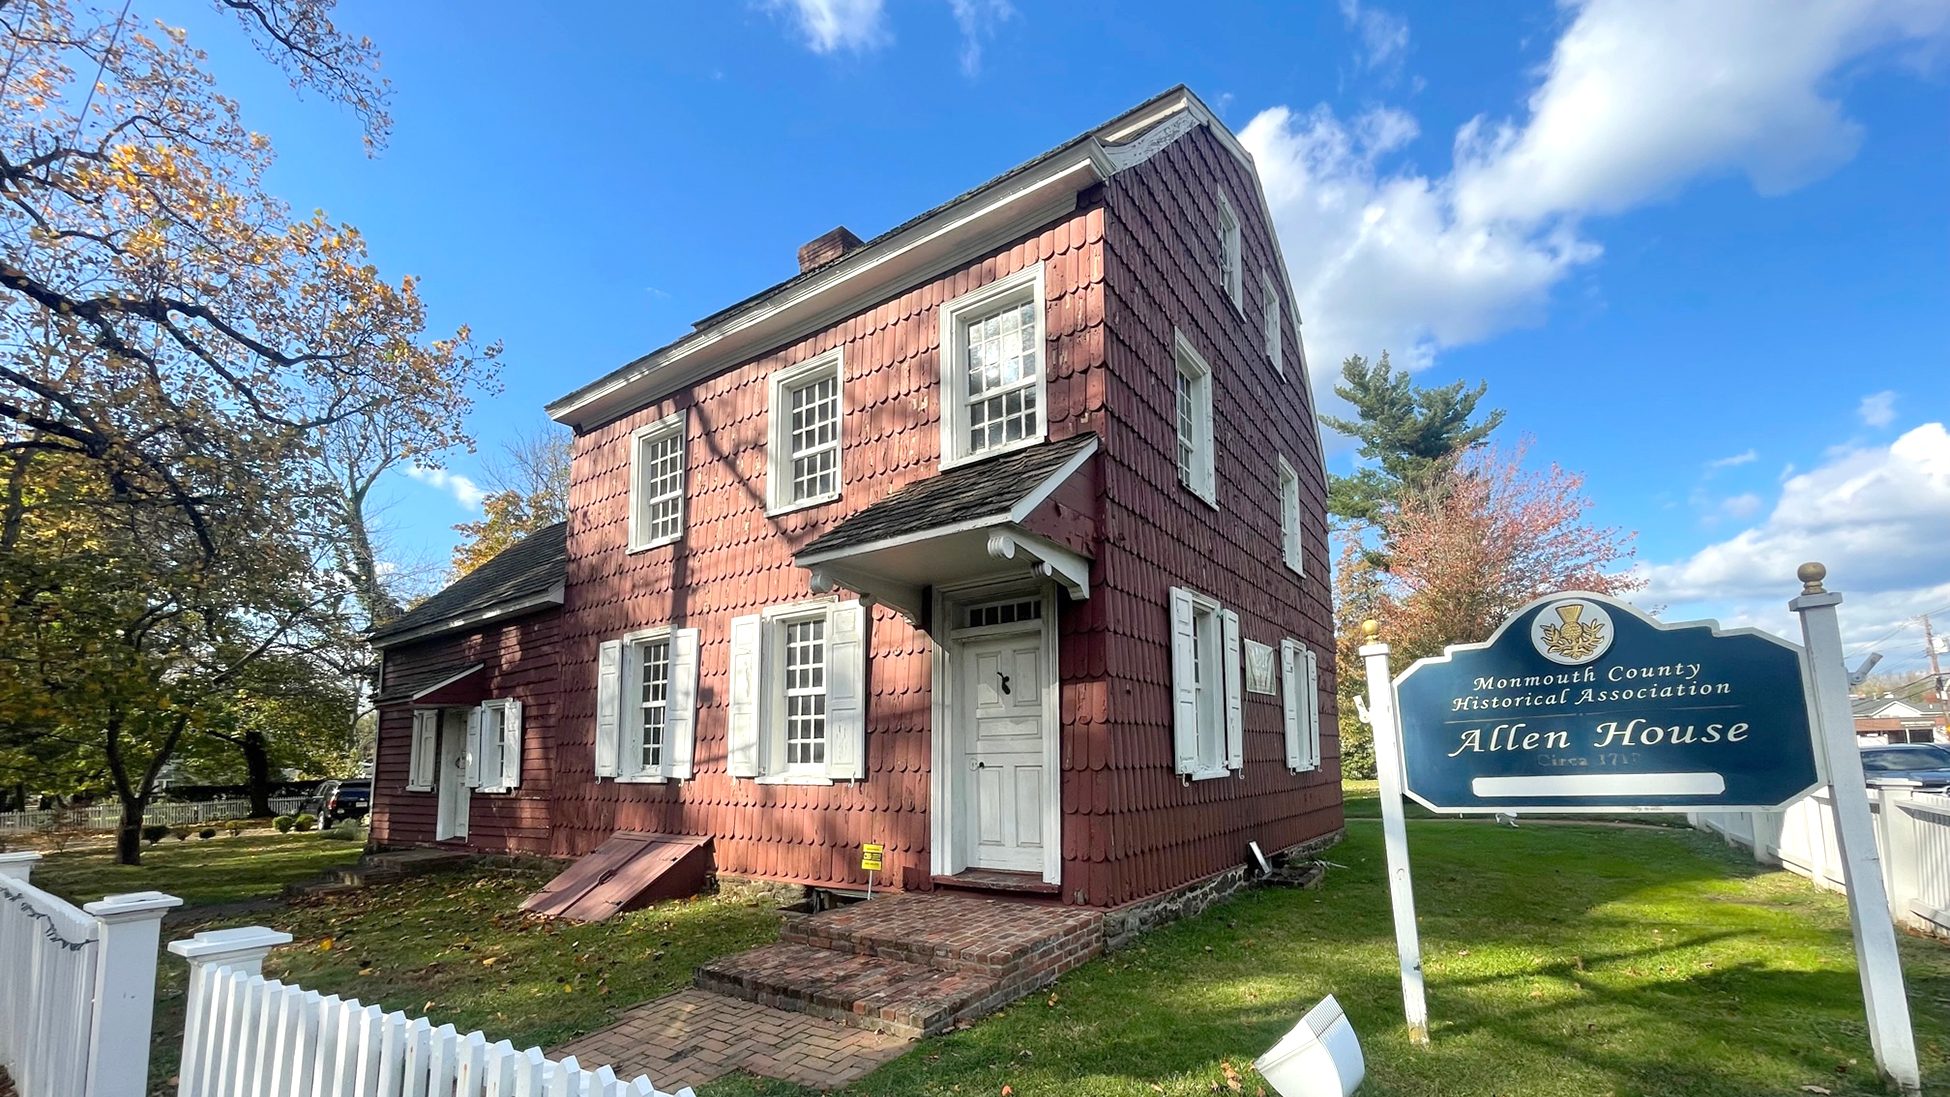 The historic Allen House at 400 Sycamore Ave. in Shrewsbury will be entering Phase II of restoration with the support of funds received from the NJ Historic Trust grant. Stephen Appezzato